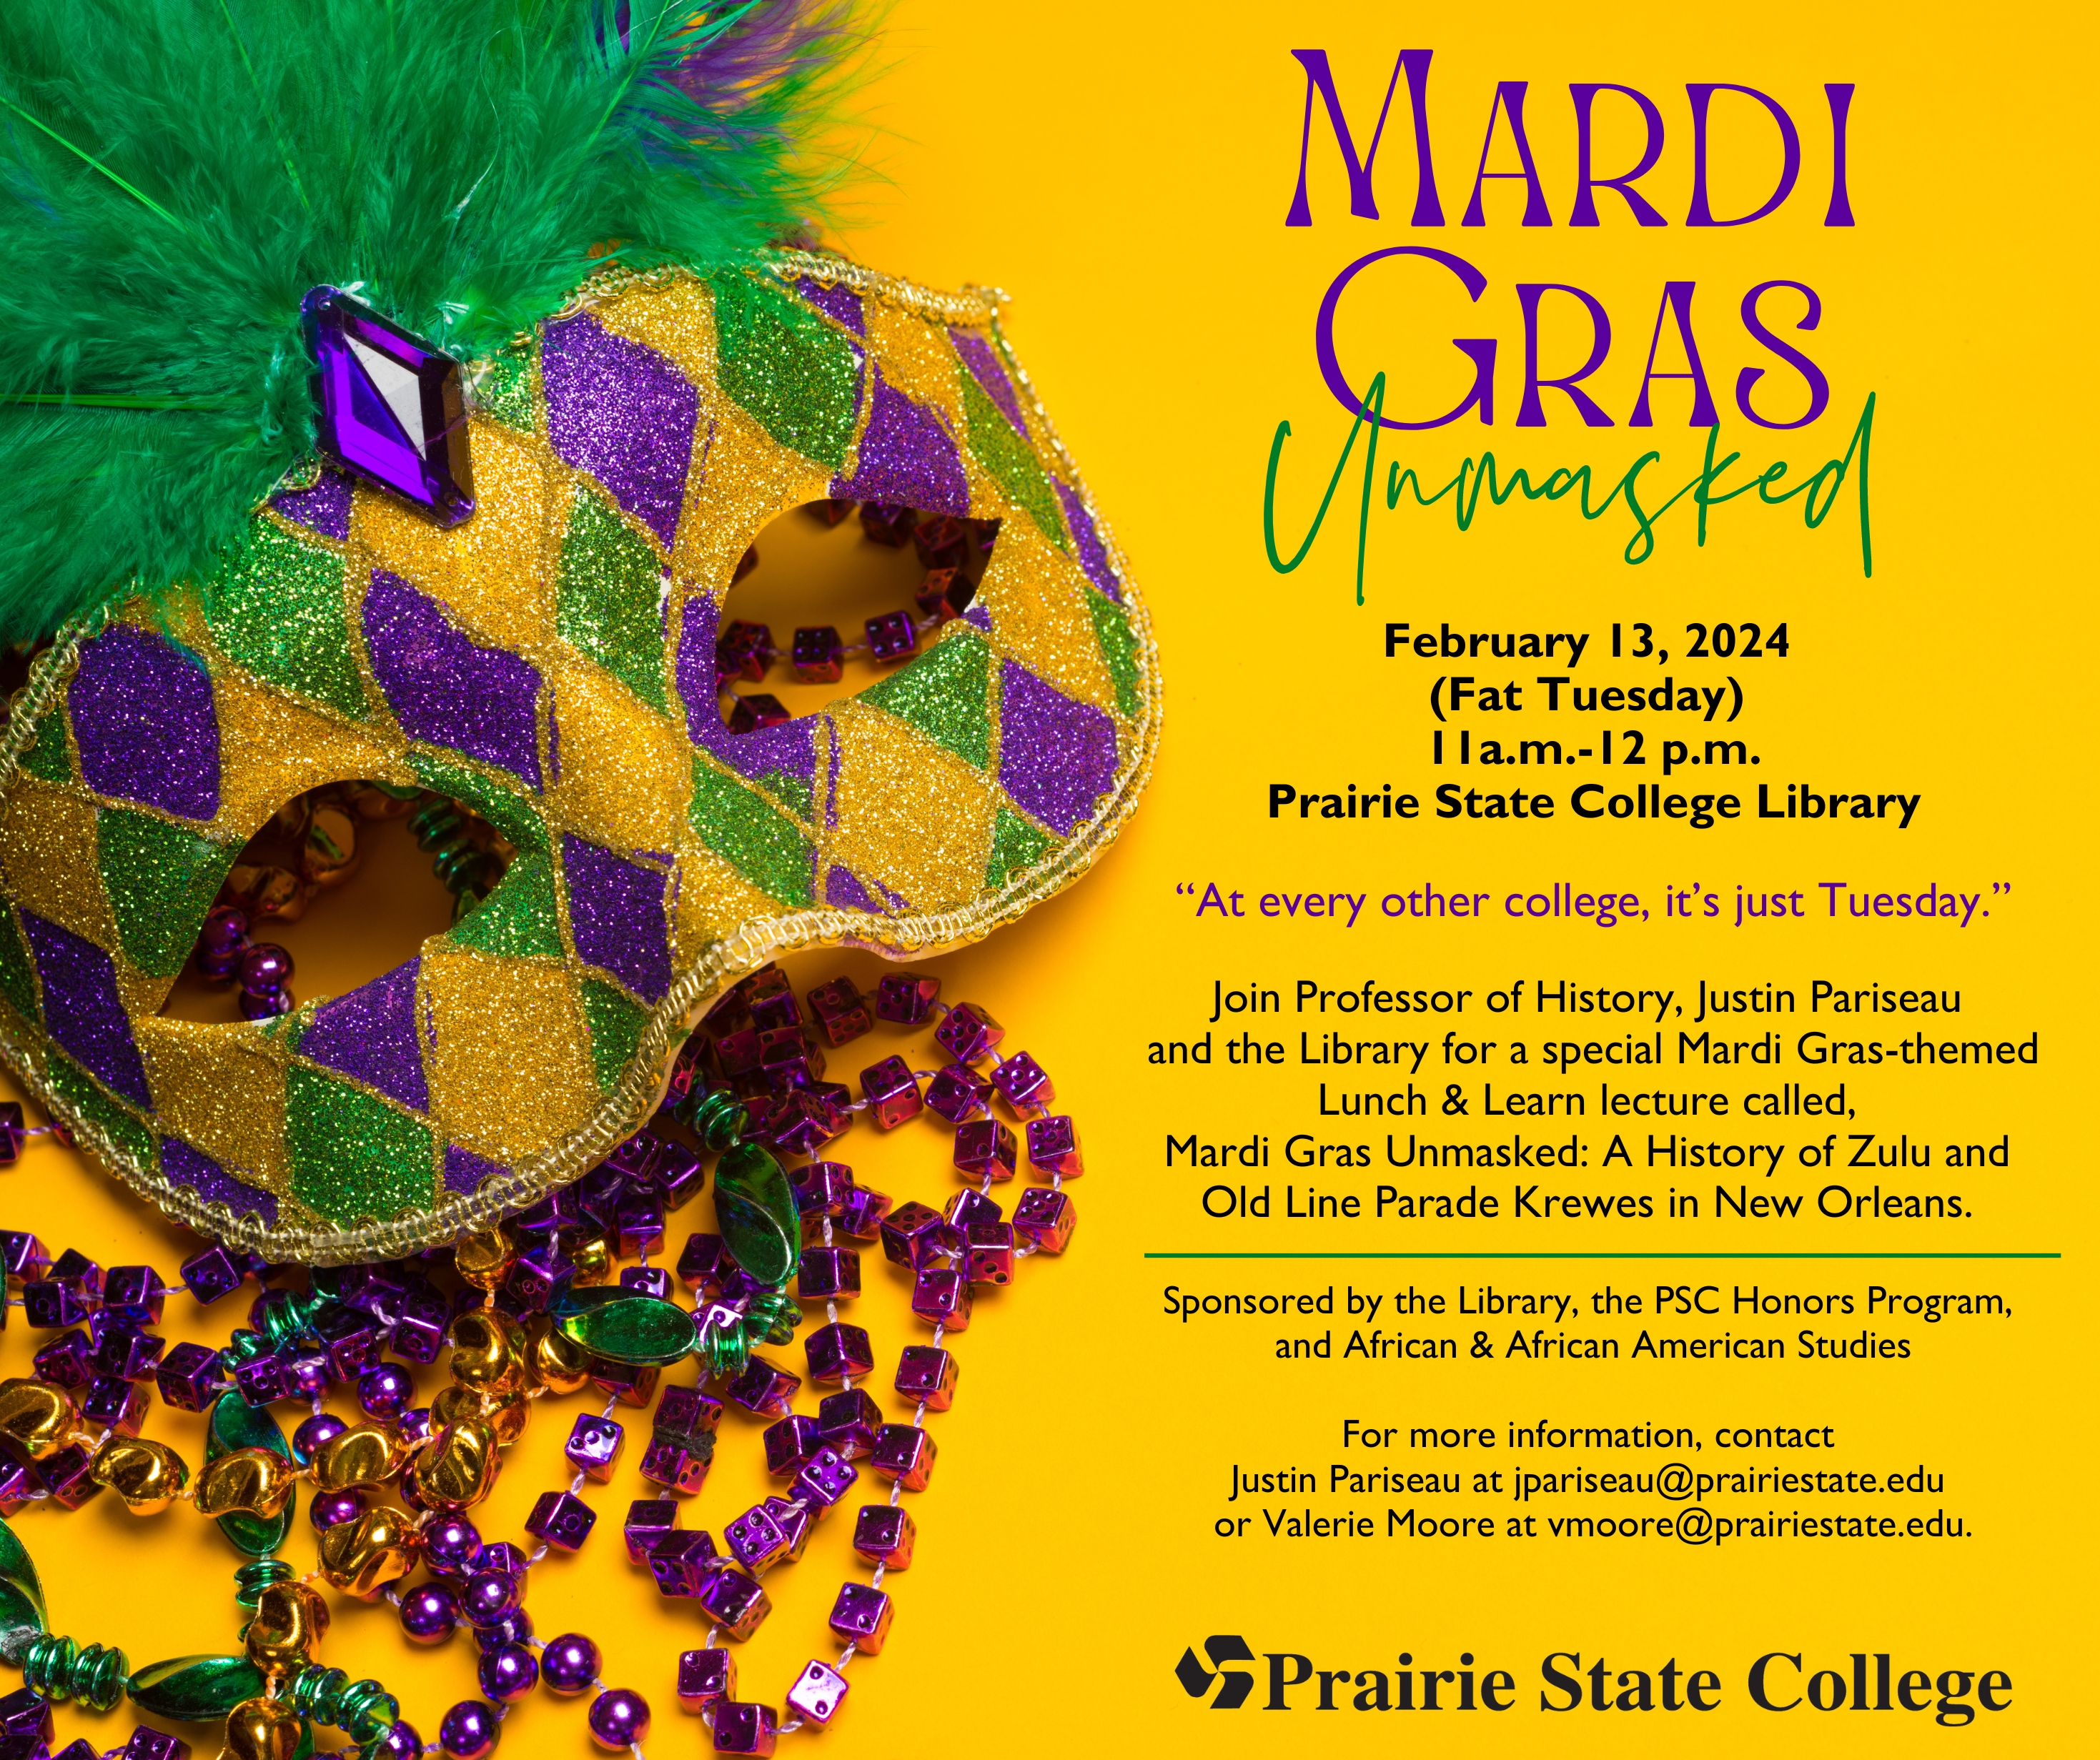 image with a Mardi Gras Mask and beads. Includes the and date, time, and information about the event, which is also listed below